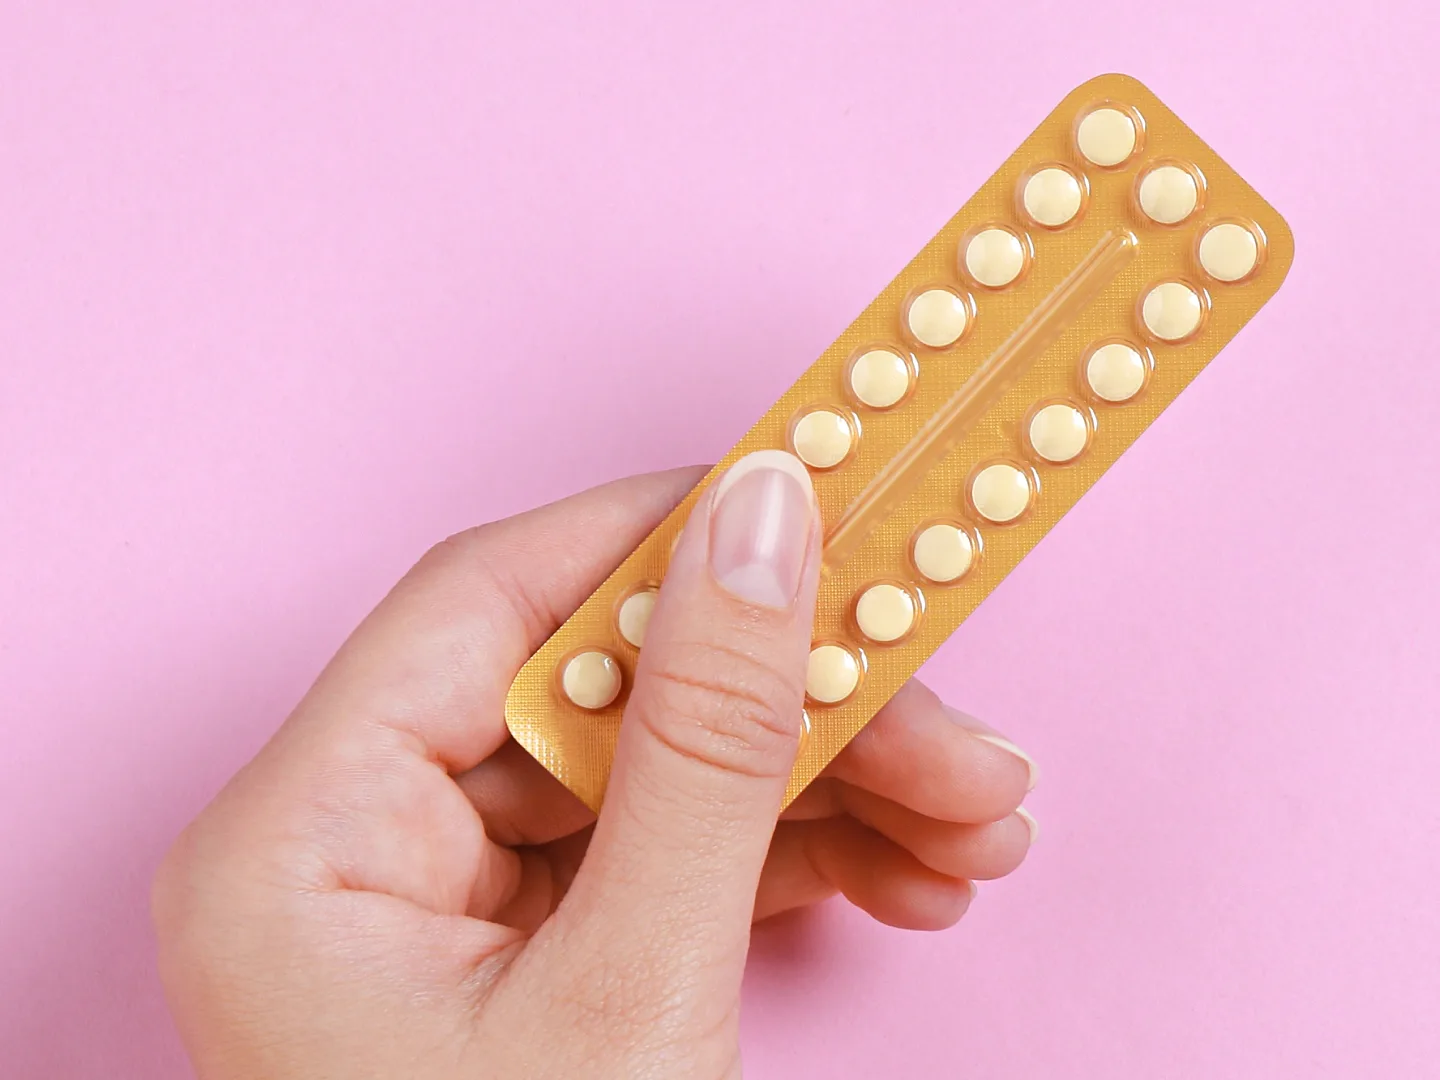 A hand holding a full blister pack of tablets on a pink background